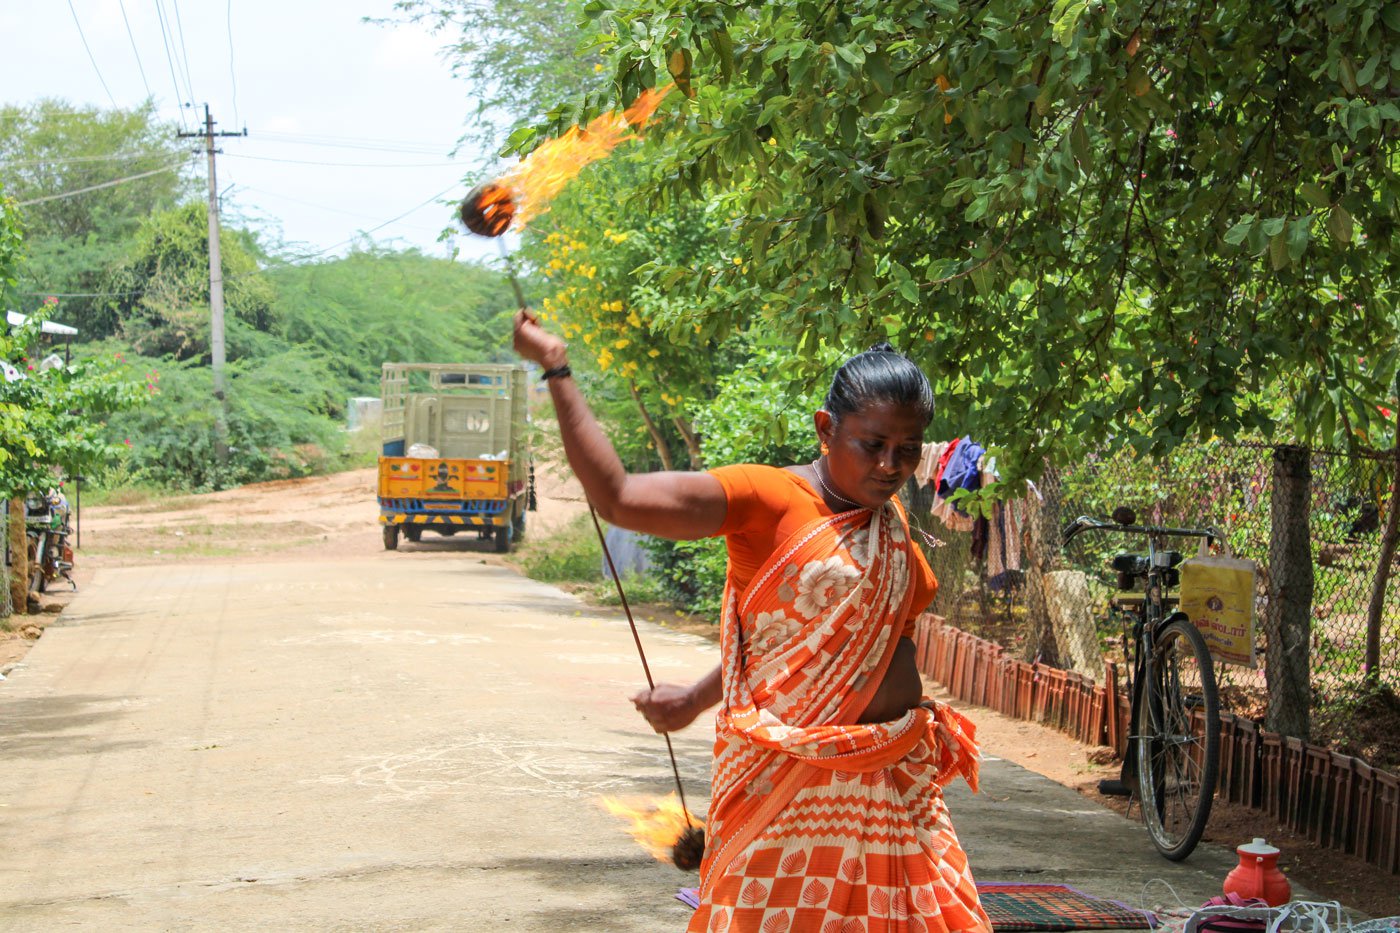 Rukmini, from the Dommara settlement in Manamadurai, draws the crowds with her fire stunts, baton twirling, spinning and more